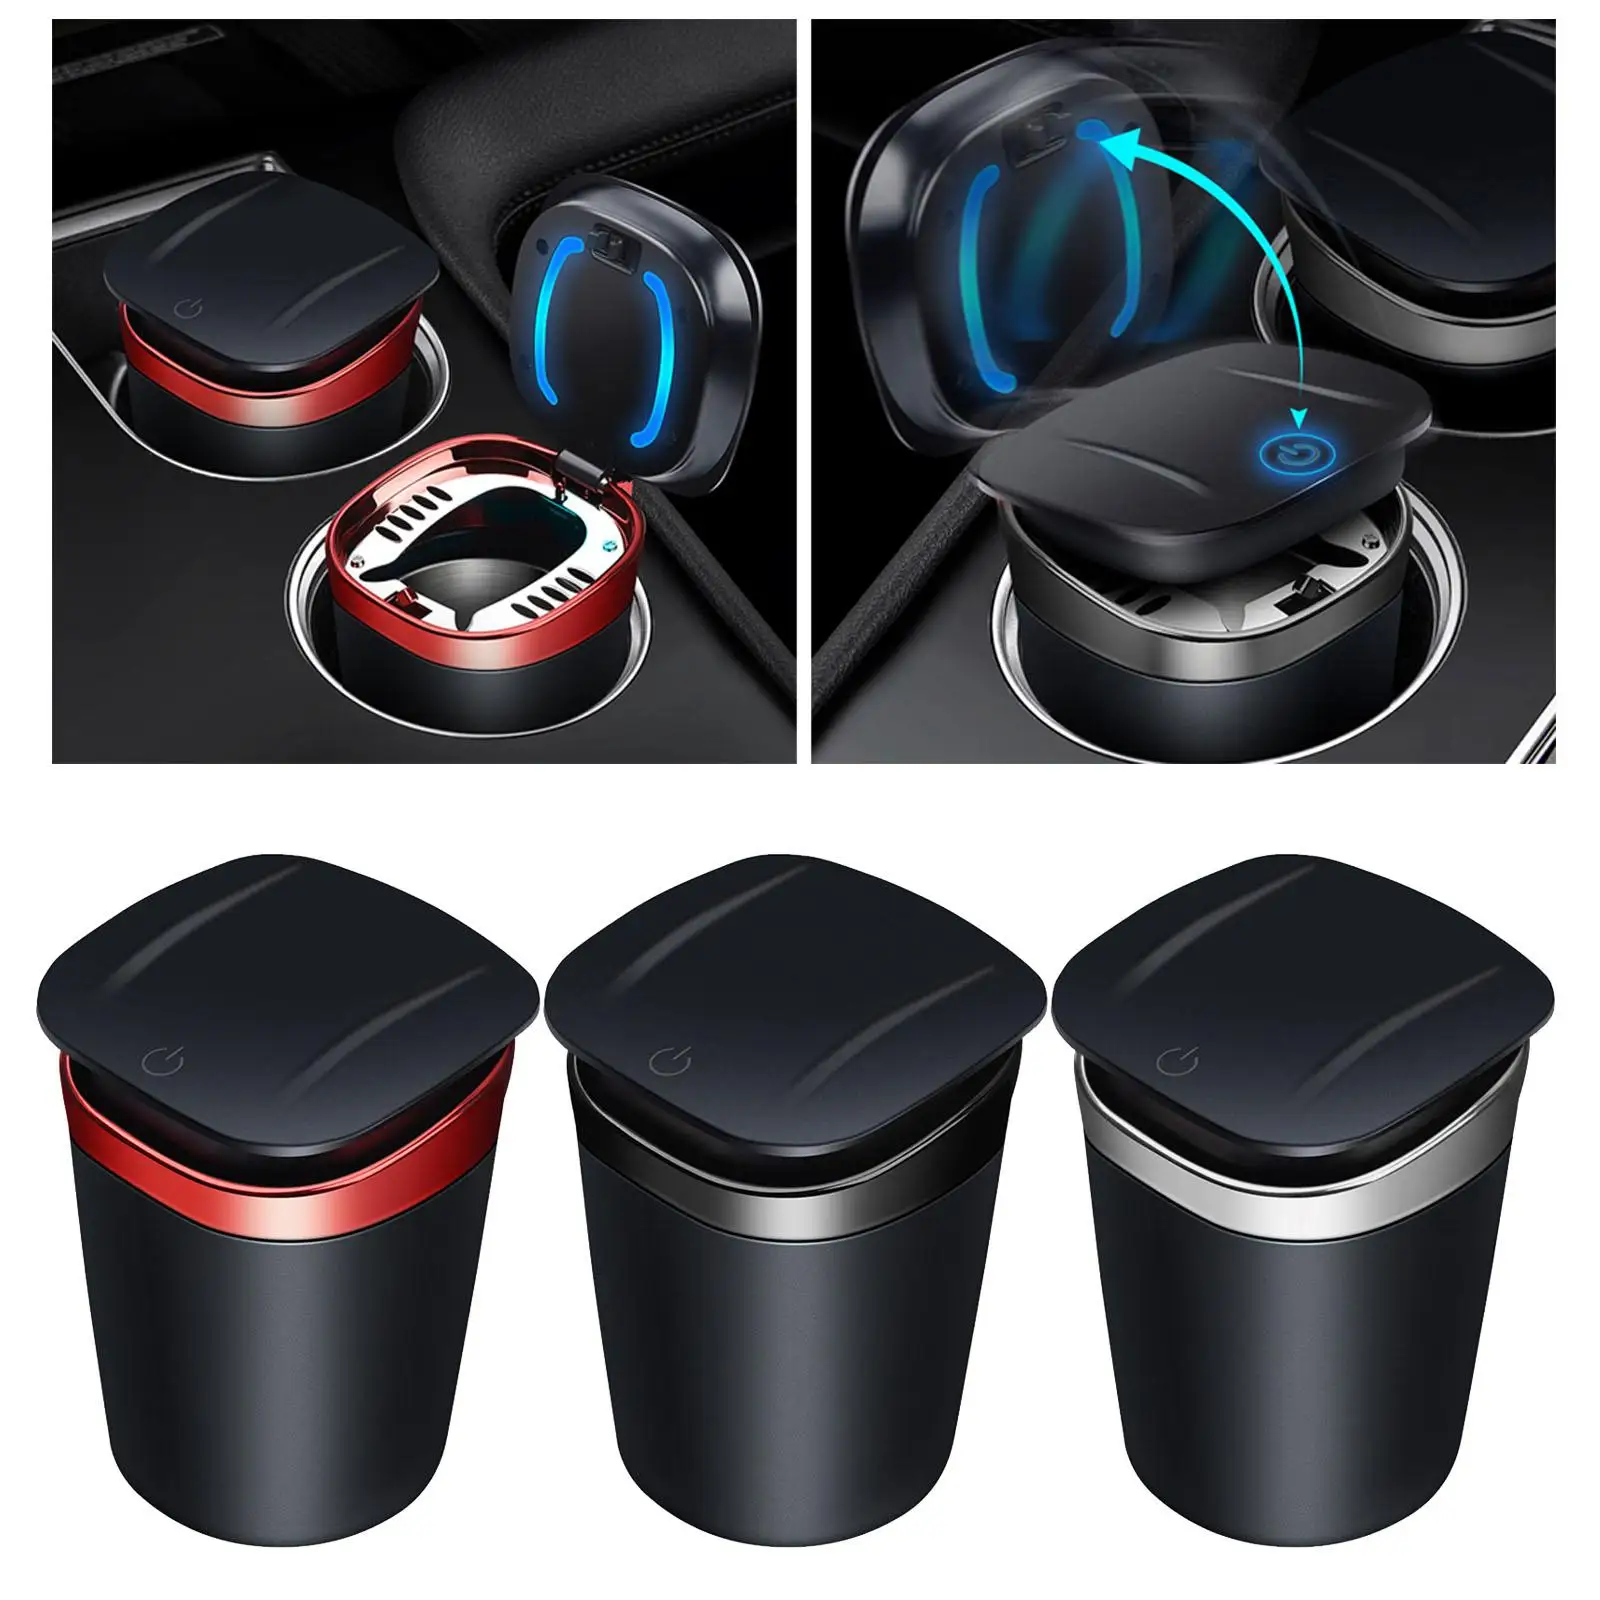 Car Ashtray Blue LED Cool Light for Car Home Travel Fit Most Car Cup Holder